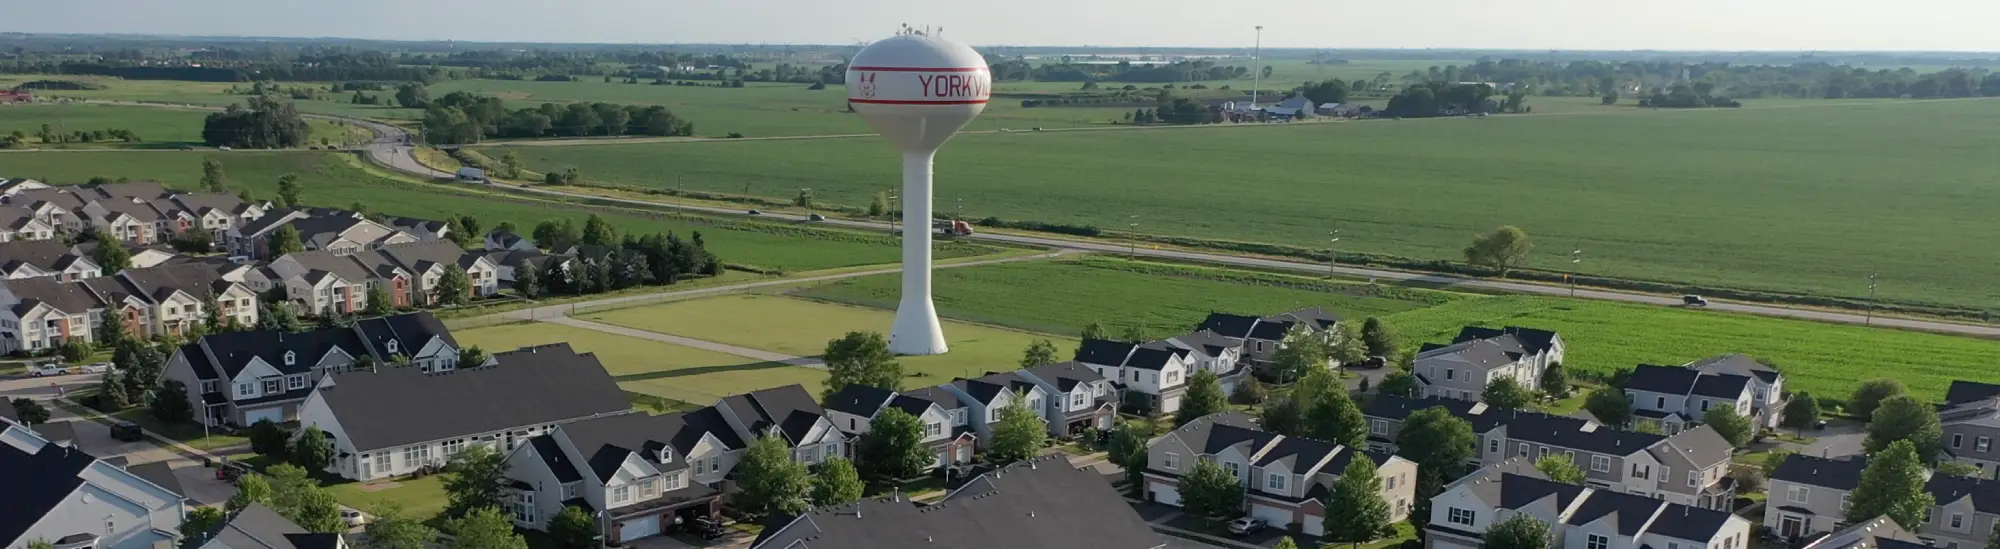 Bristol Bay aerial view with Yorkville water tower